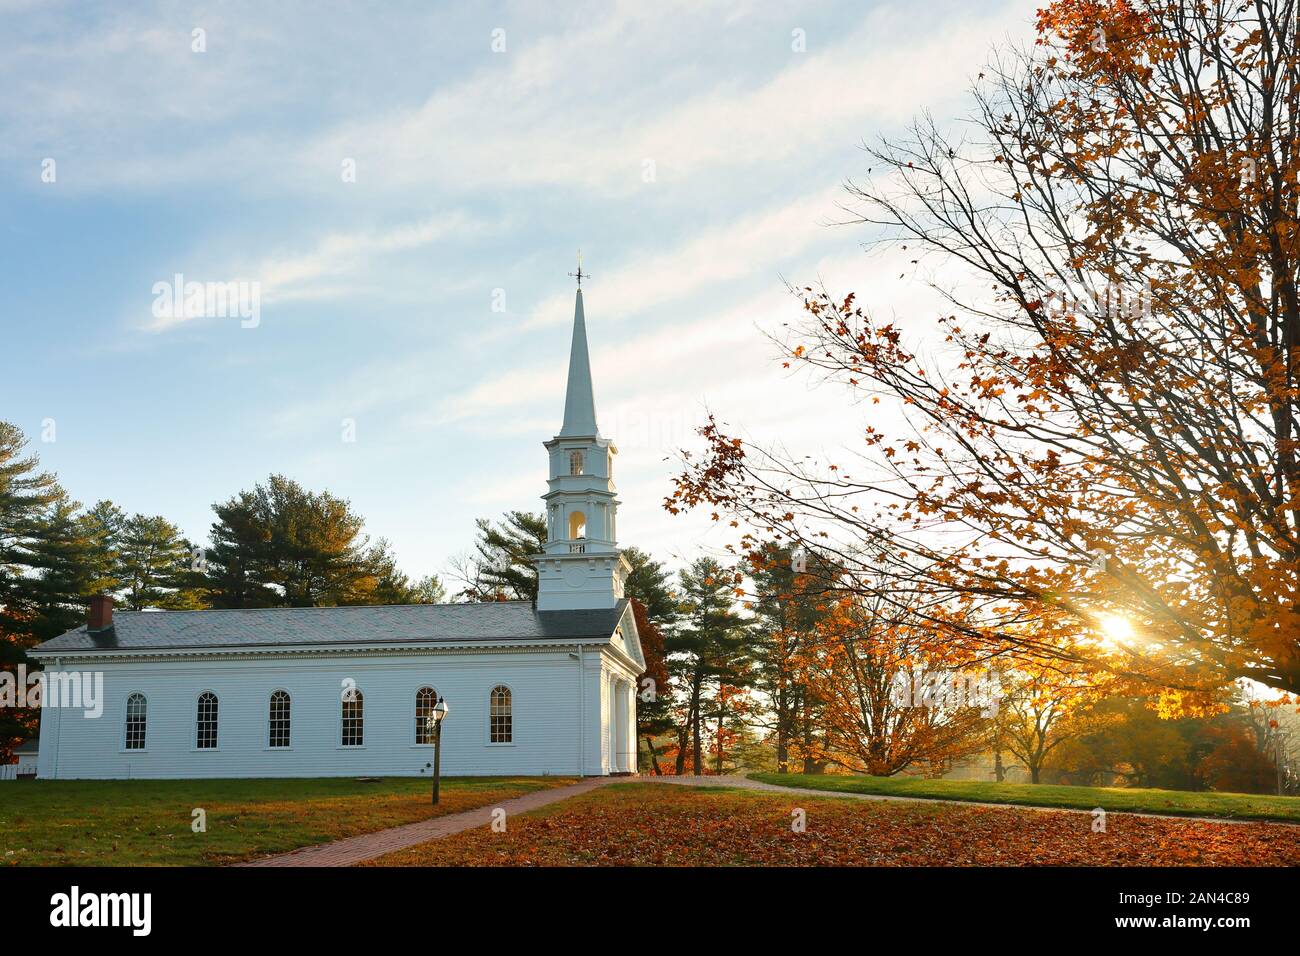 The Martha Mary Chapel of Wayside Inn on a sunny morning. The Chapel was built by Henry Ford and has long been recognized as a Sudbury landmark. Stock Photo